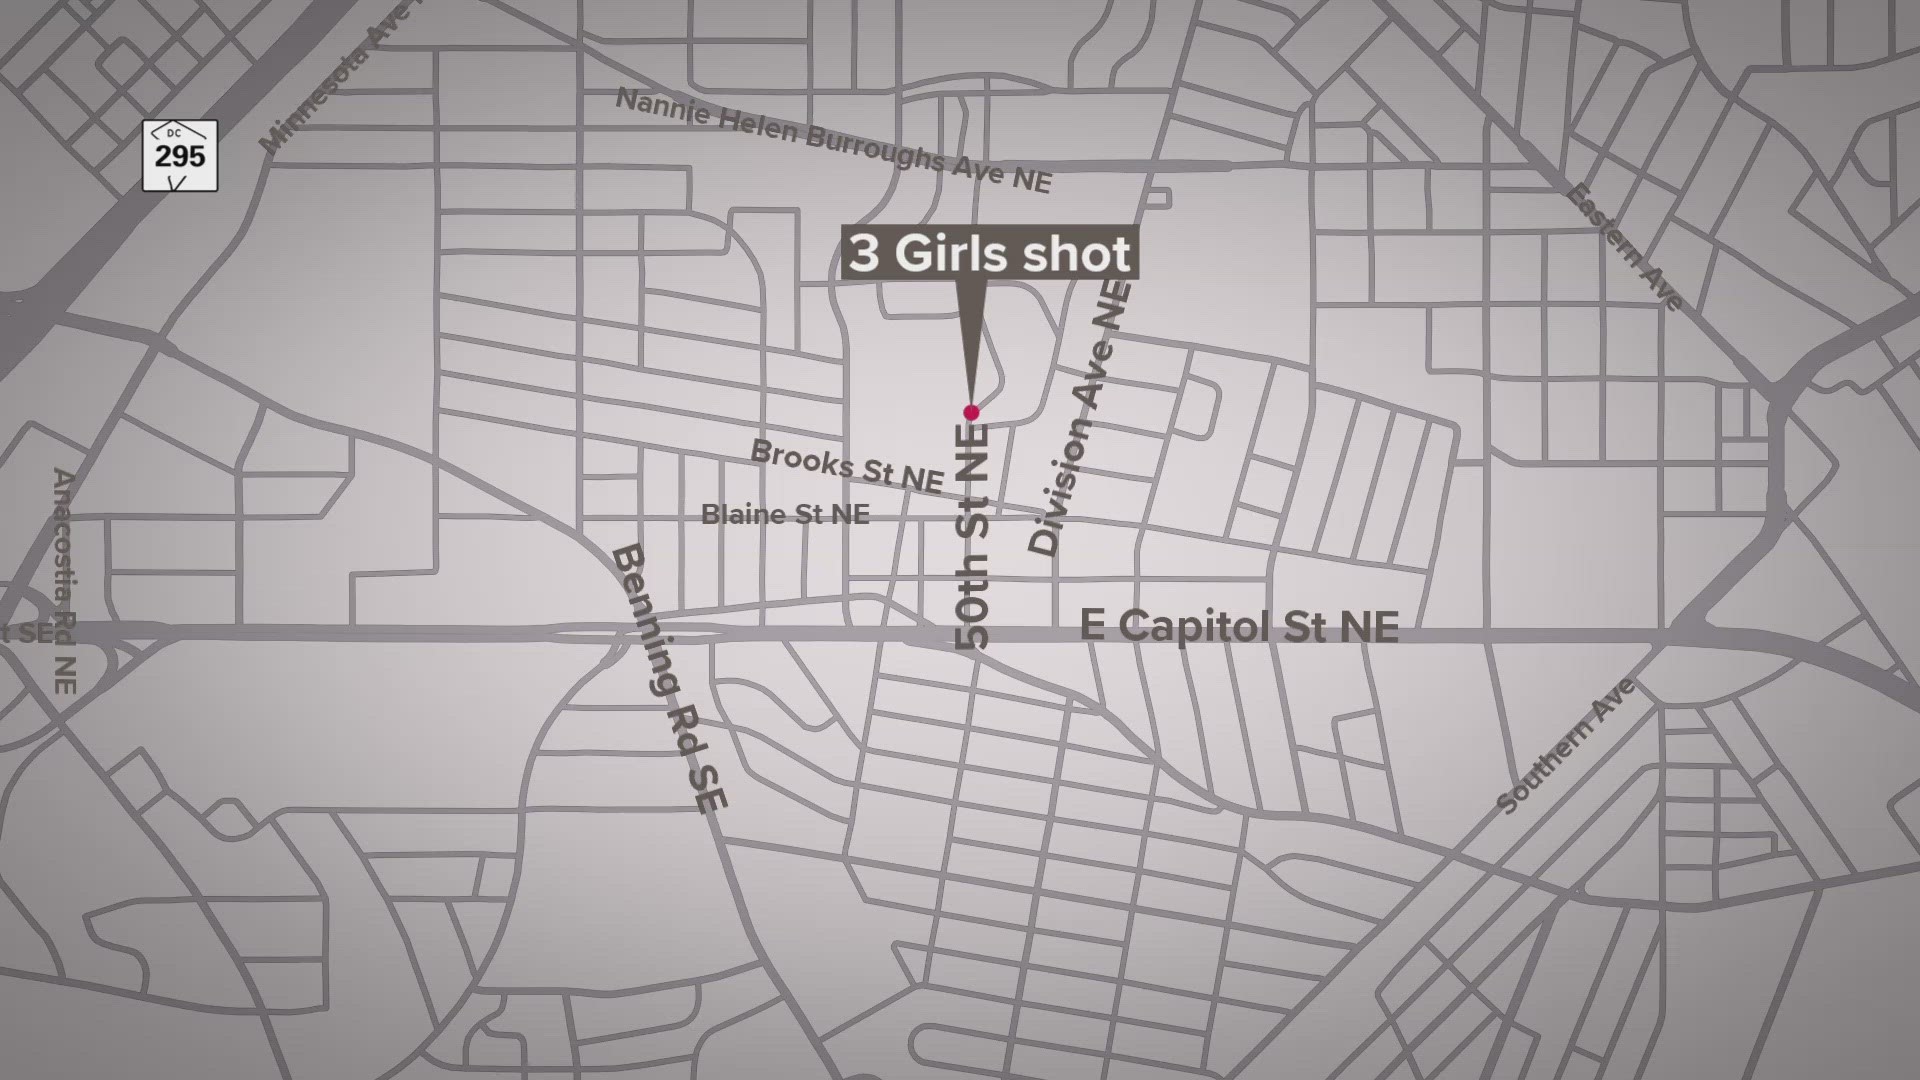 All three girls were shot at the same time on 50th Street in Northeast D.C.